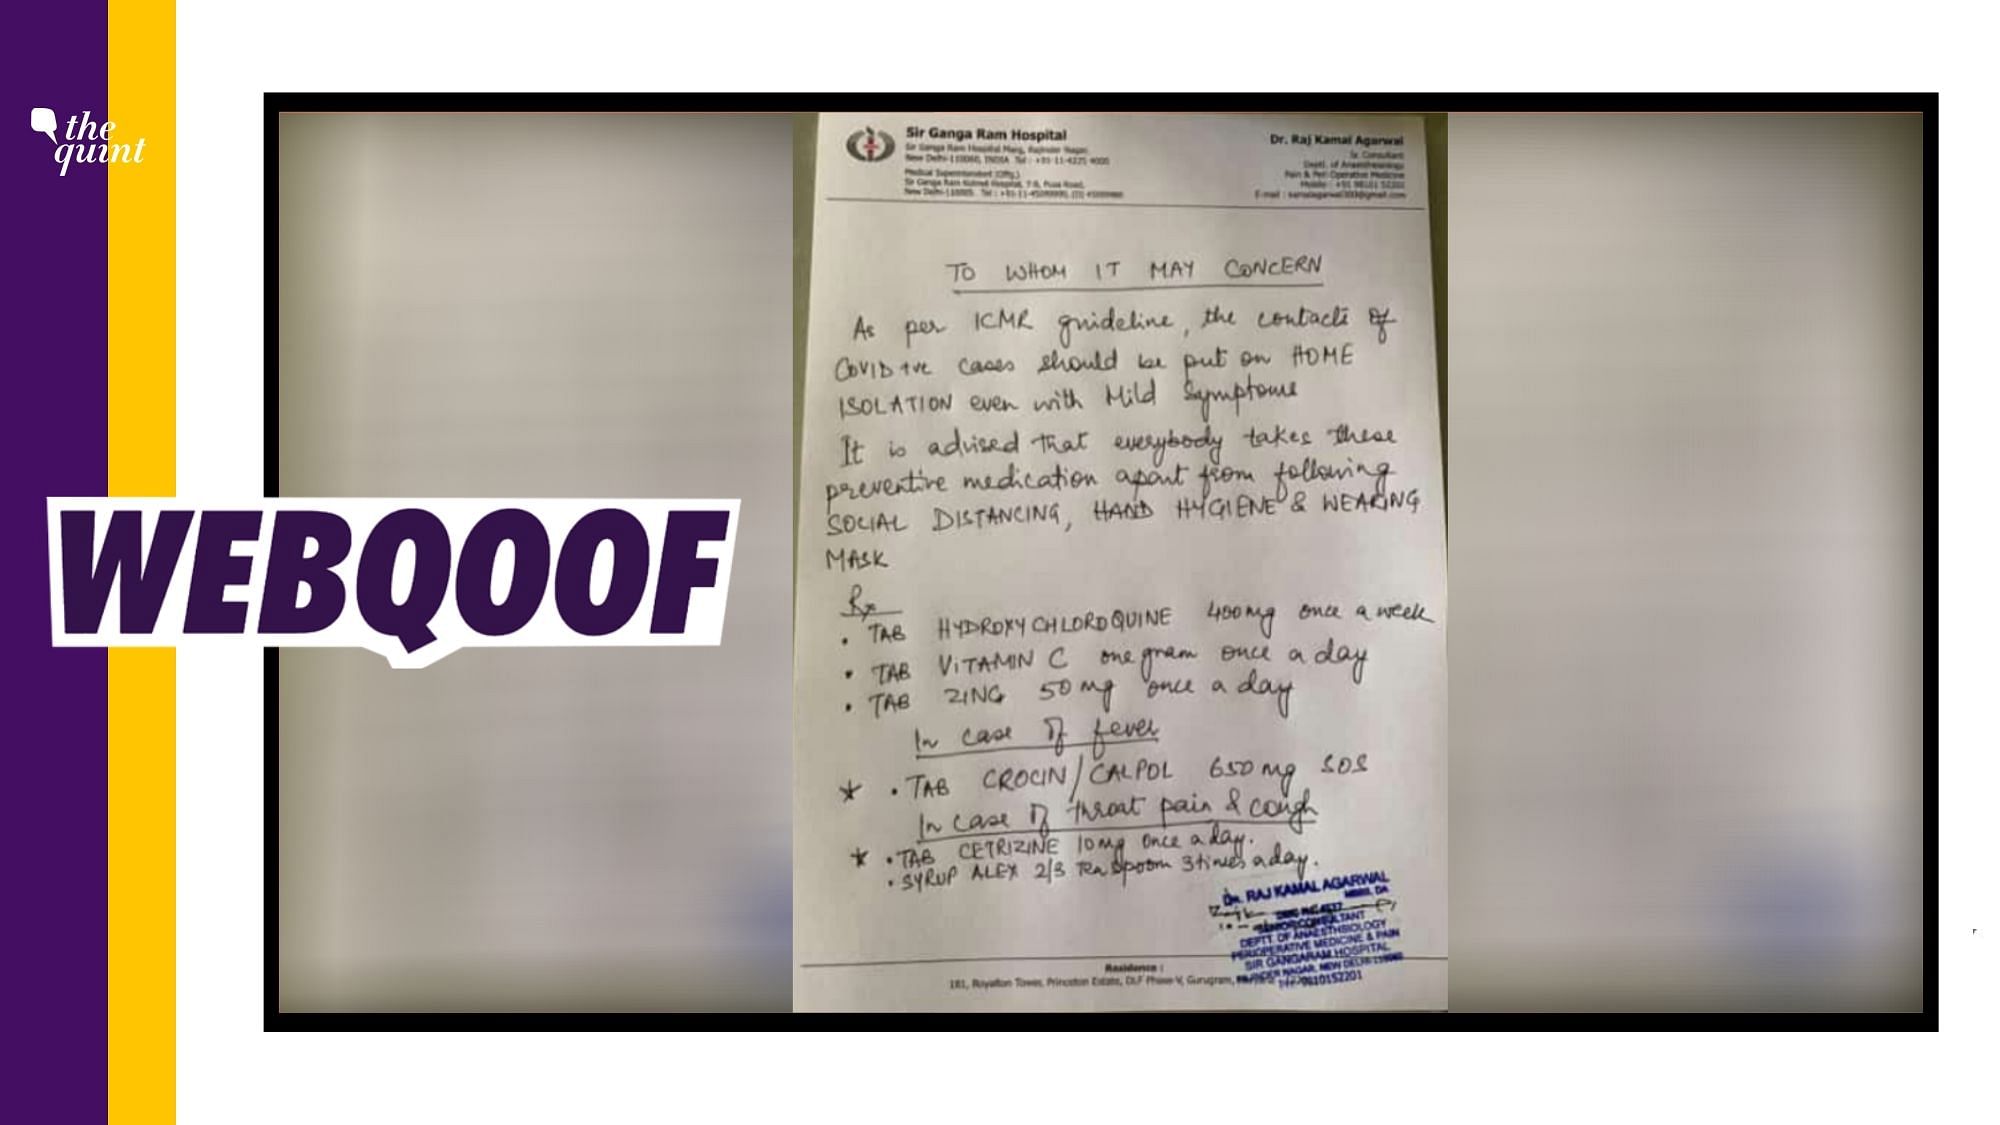 The hospital has issued a clarification saying that the doctor’s signature have been forged.